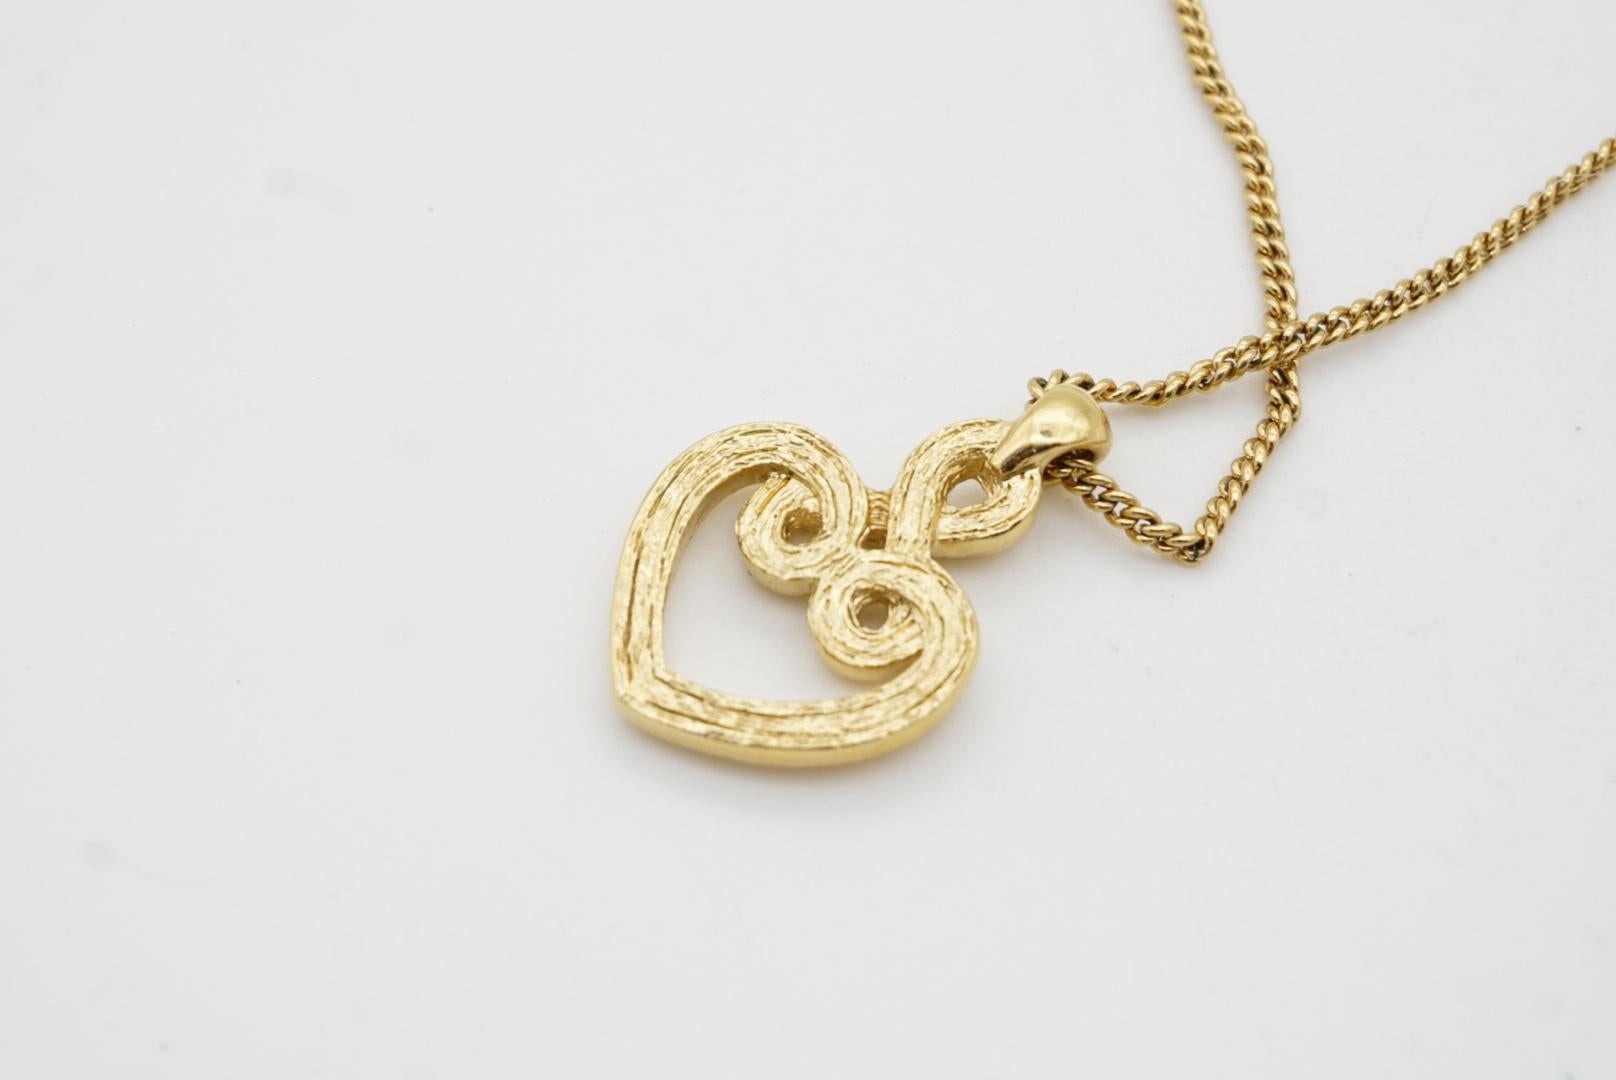 Christian Dior Vintage 1990s Baroque Heart Love Knot Openwork Pendant Necklace For Sale 6